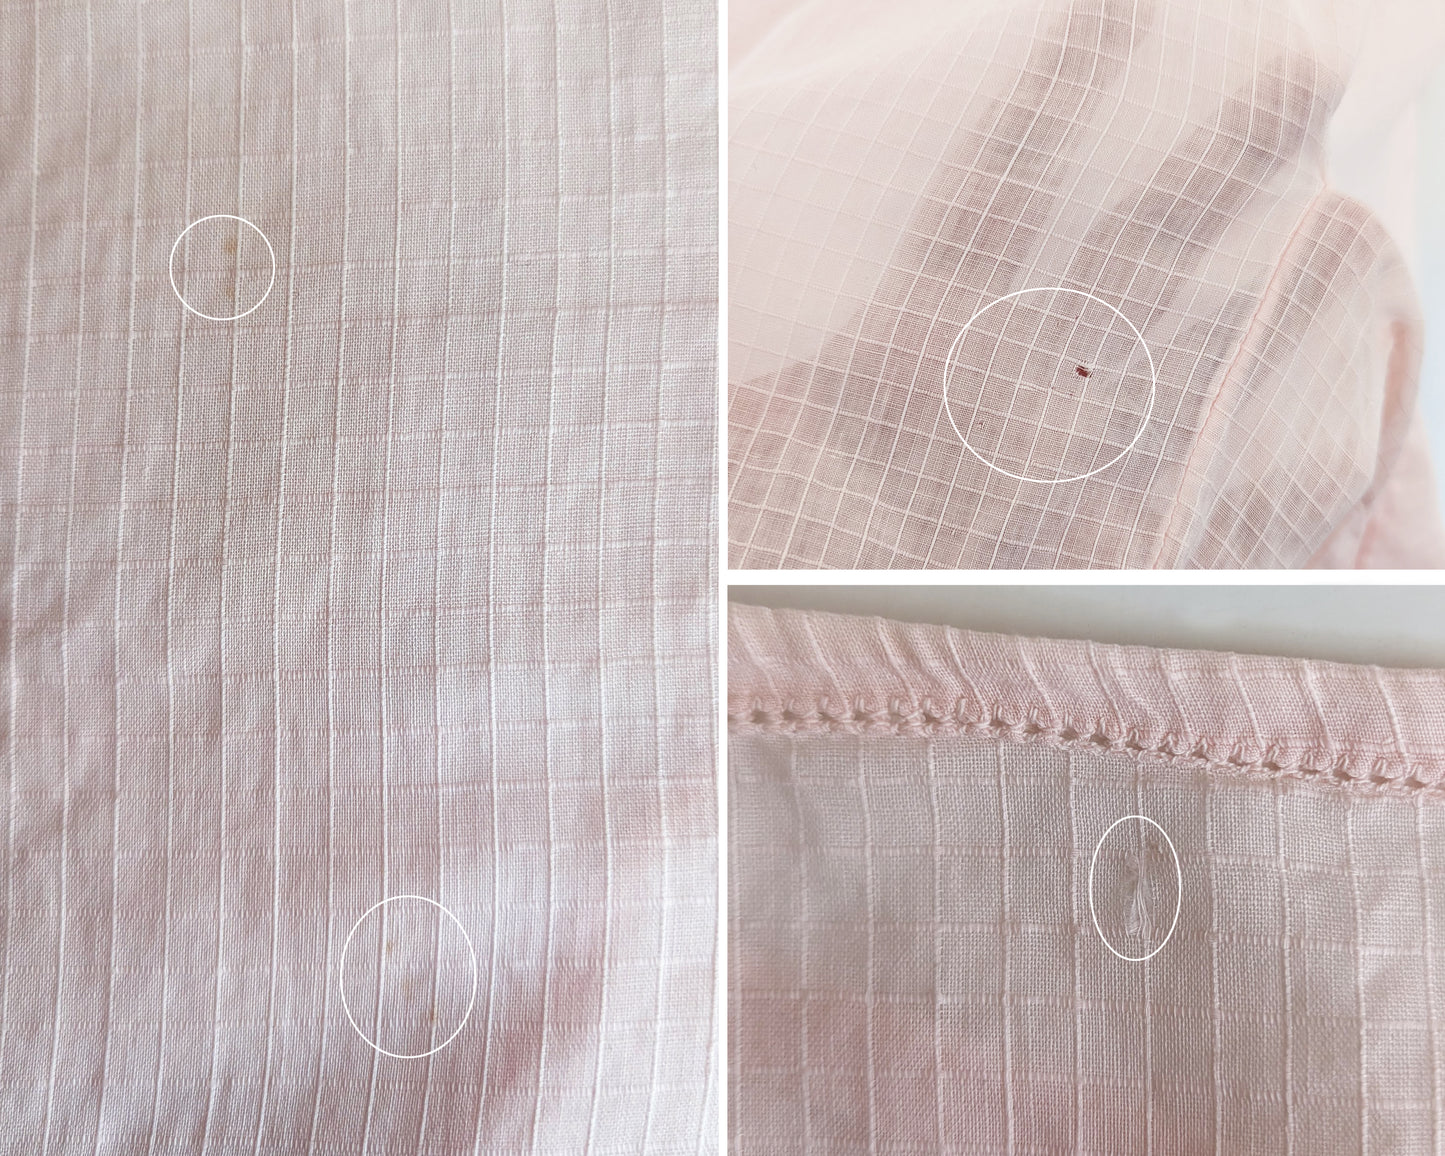 A photo of collage of small flaws which include on the left: a few faint marks on the back. Top right: small scattered holes on the front near the leg. Bottom right: a small fray on the back near the top.